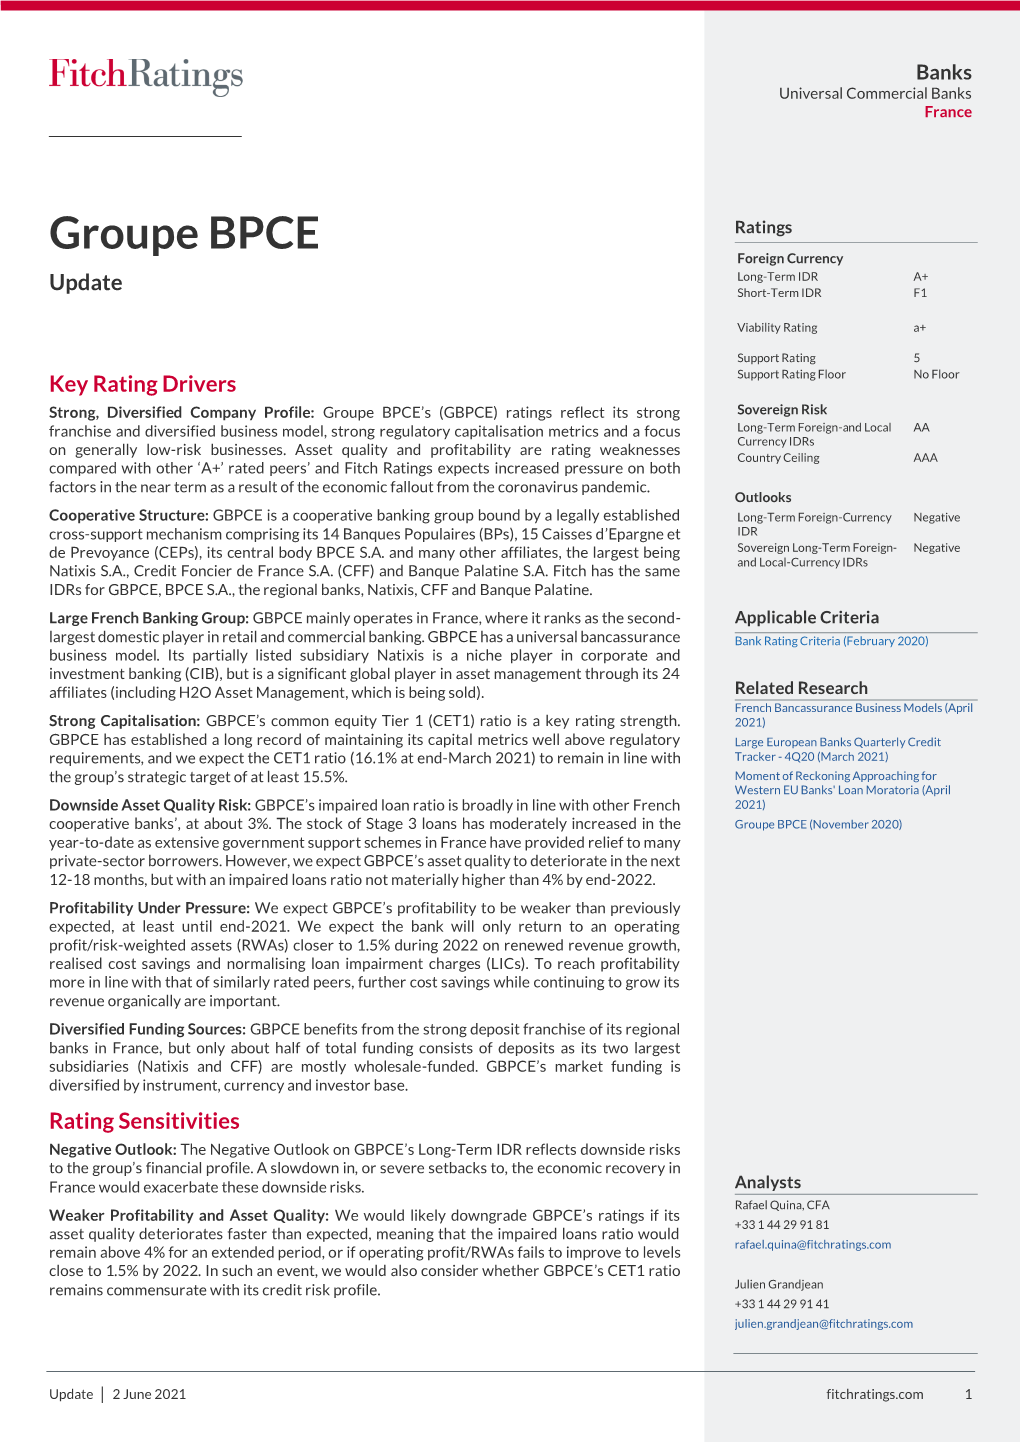 Groupe BPCE Ratings Foreign Currency Long-Term IDR A+ Update Short-Term IDR F1